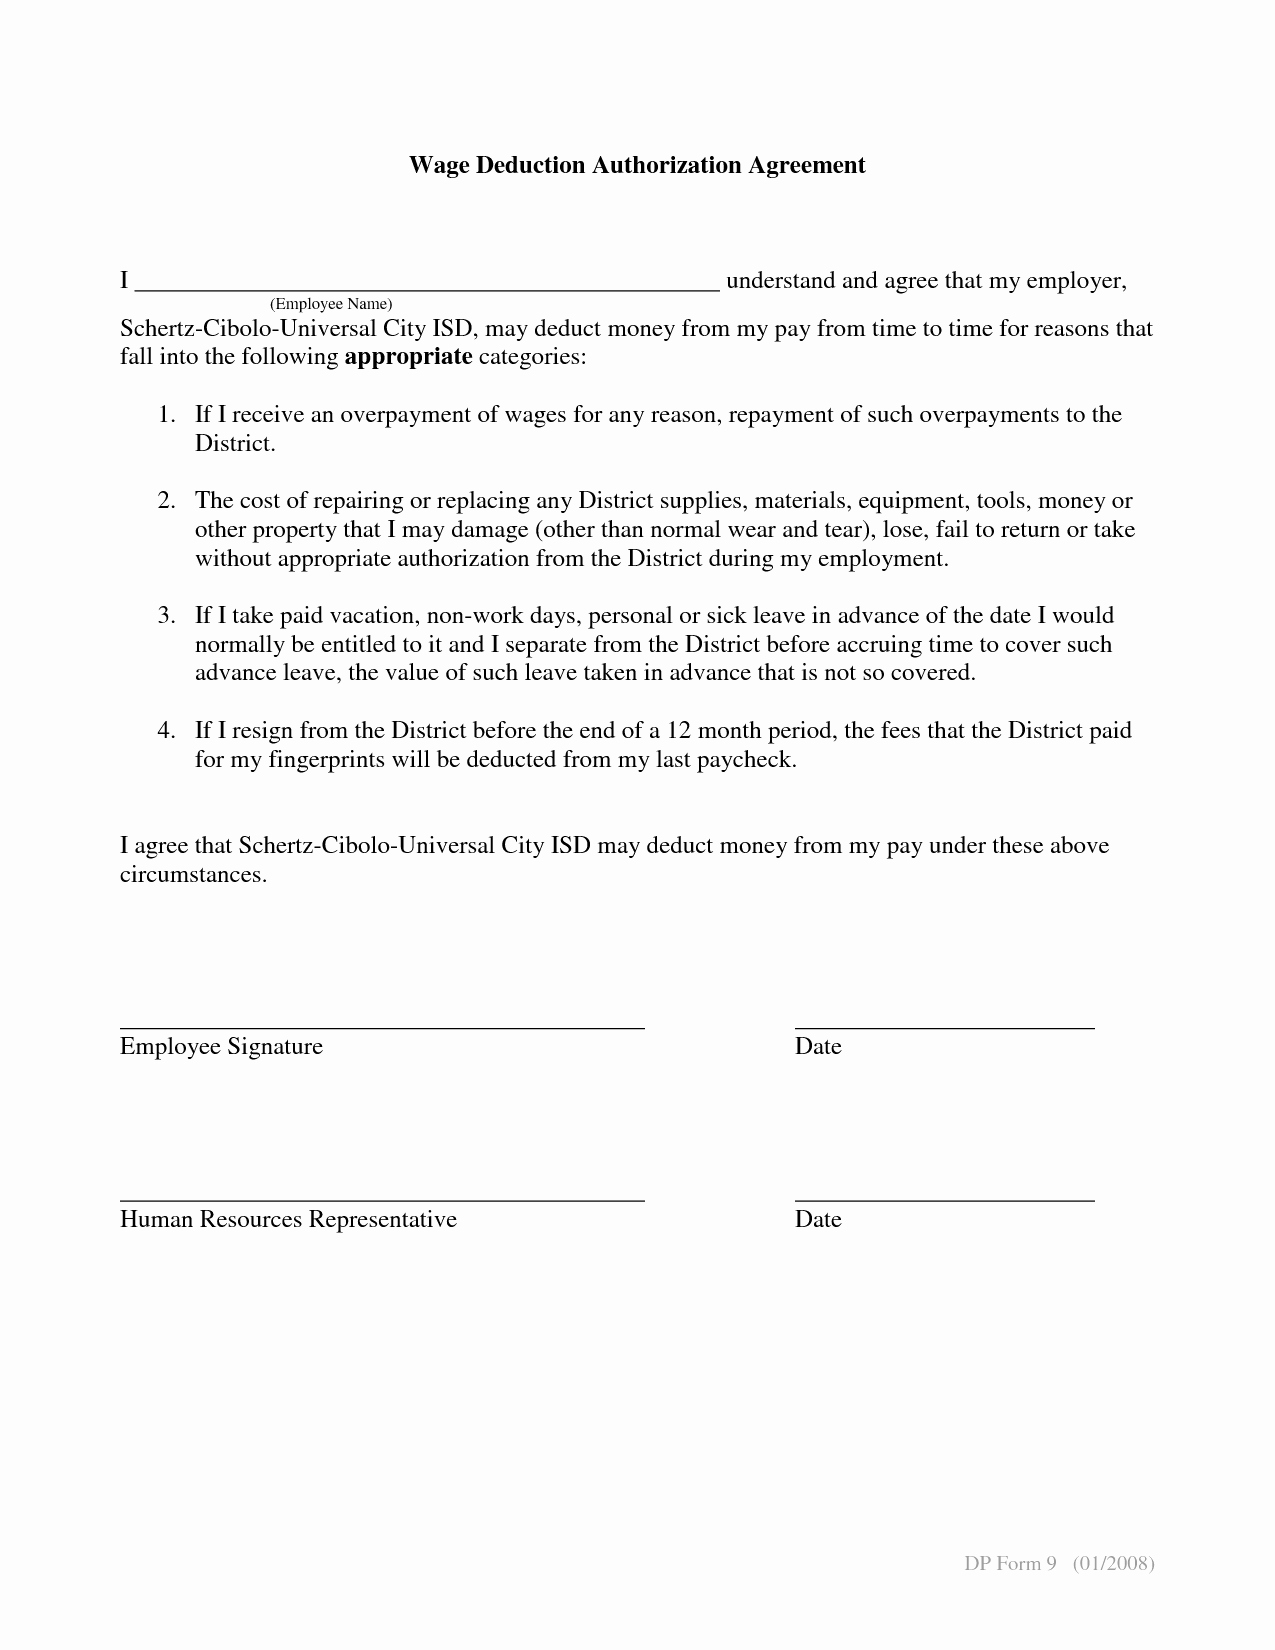 Wage Increase form Inspirational 10 Best Of Employee Wage Agreement form Salary